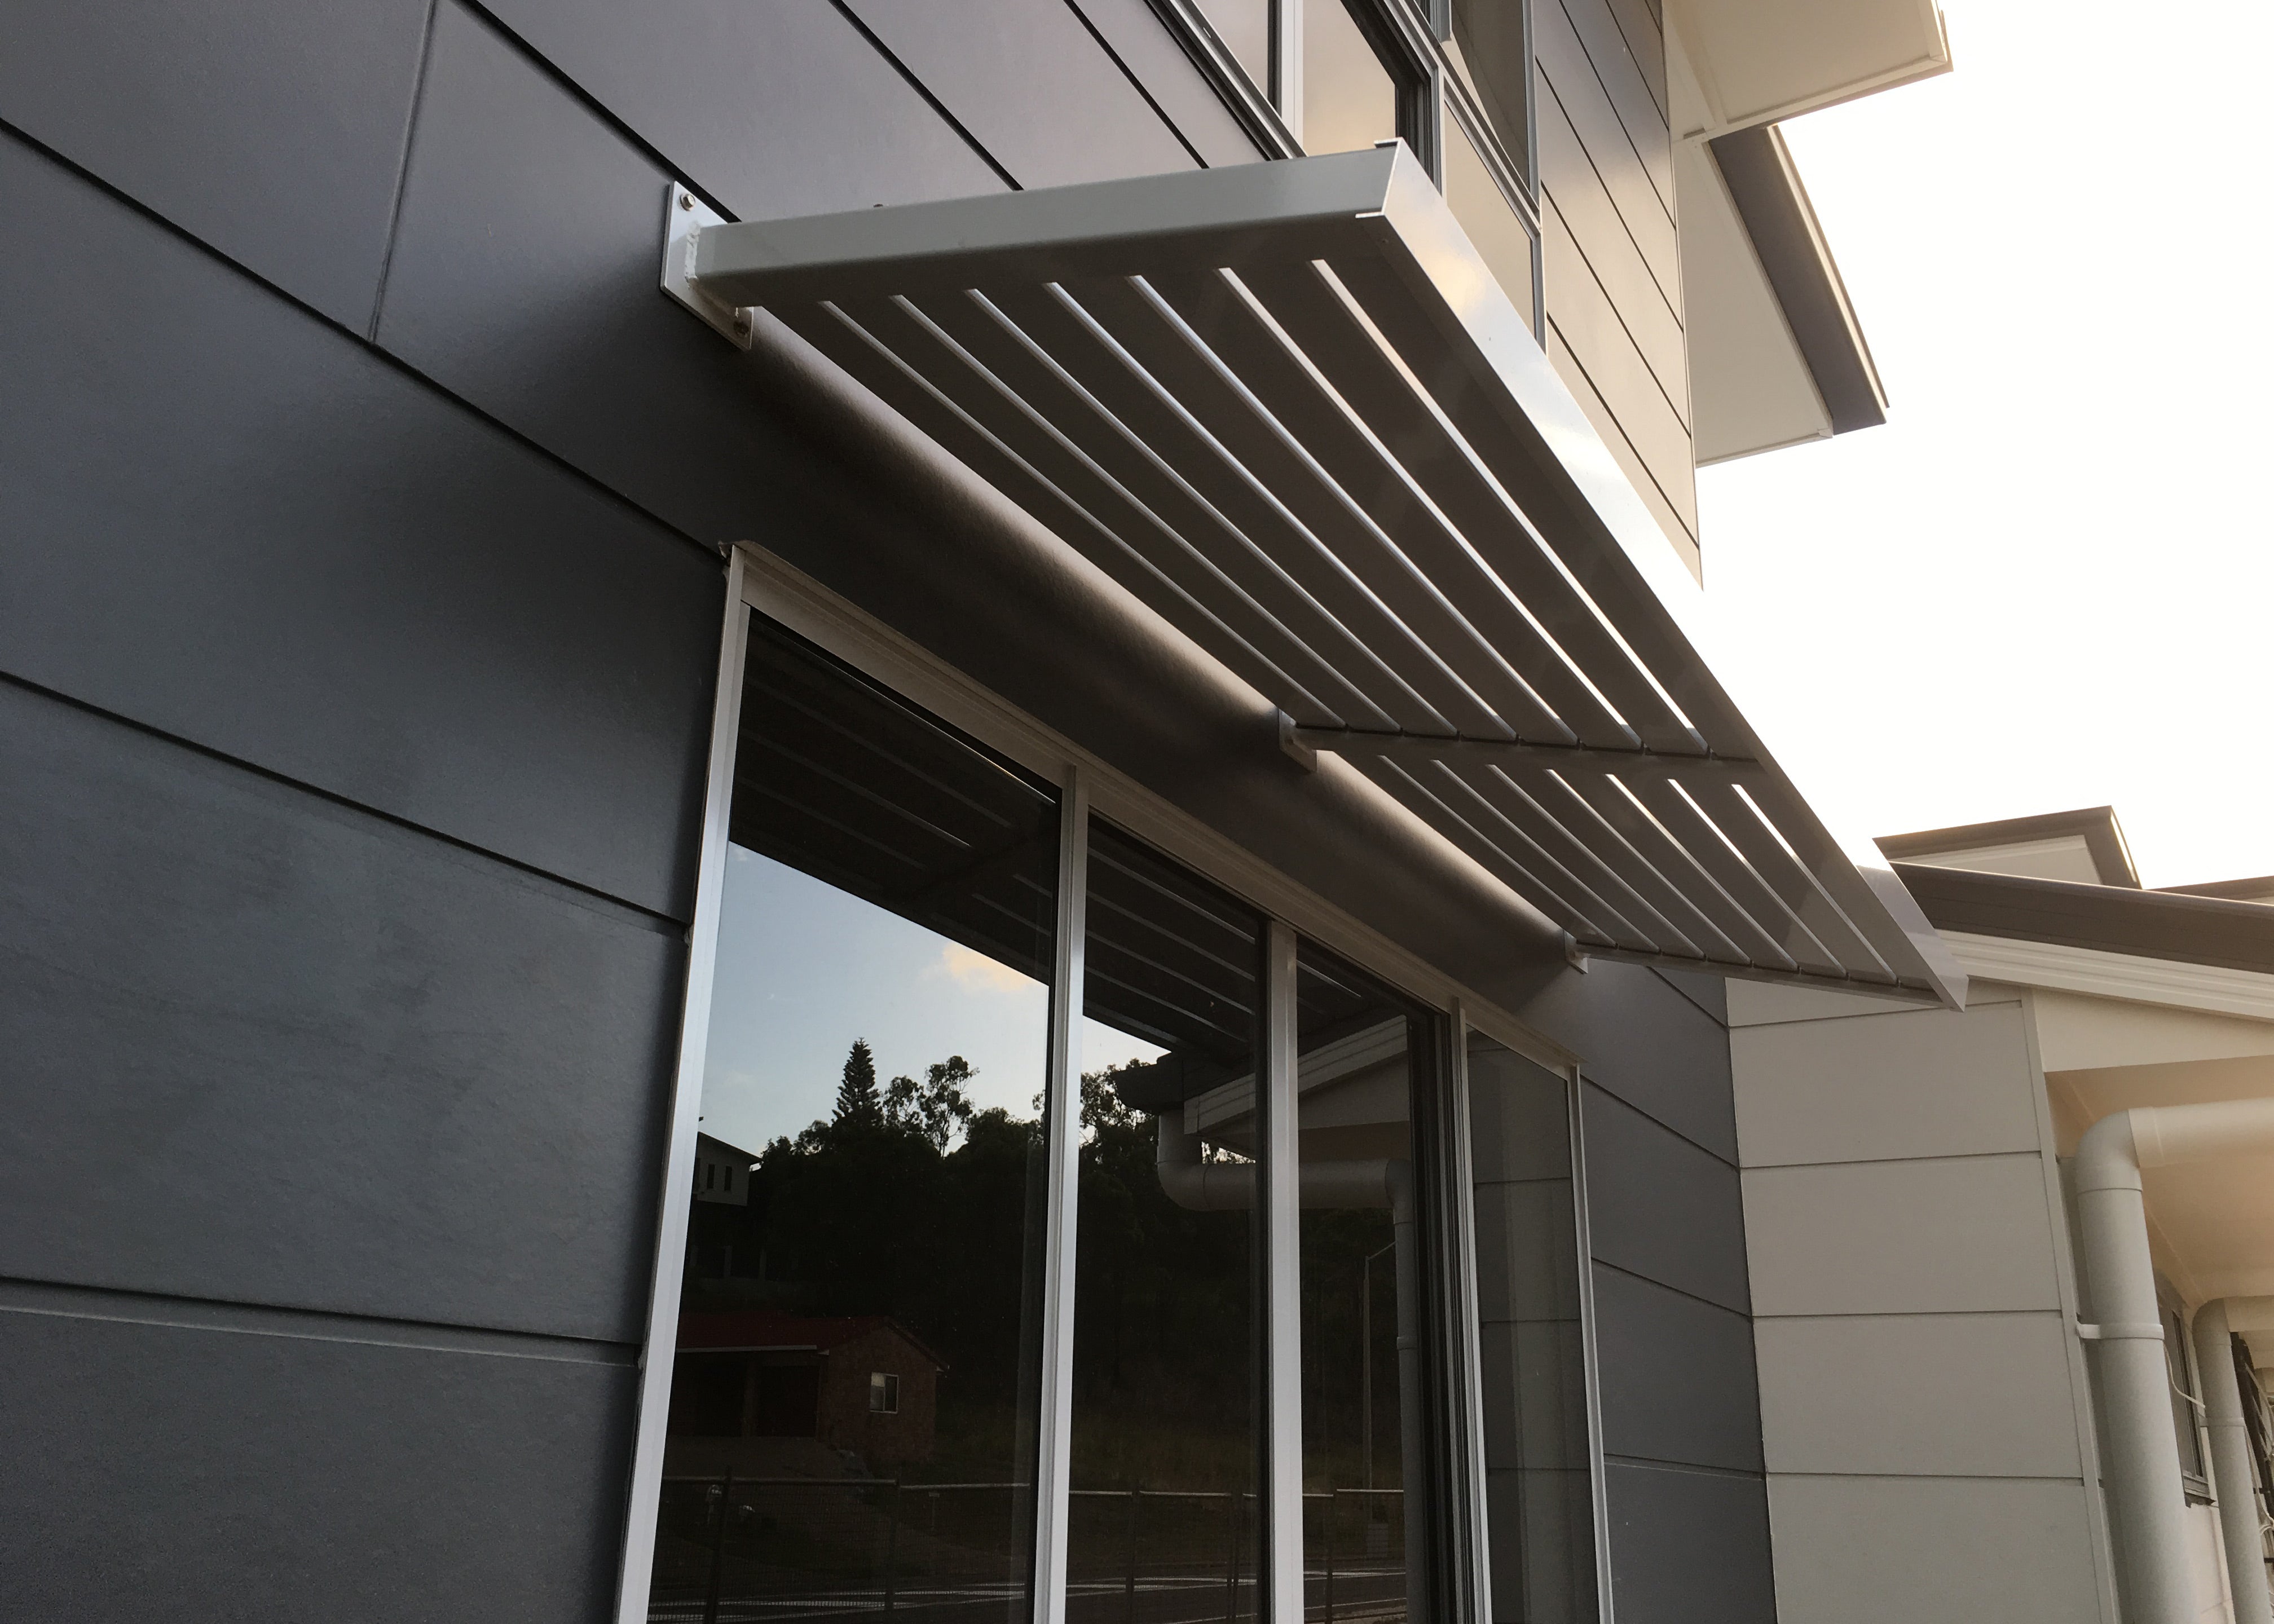 Clik'n'Fit® Aluminium Slat Awning in Dune on an angle above a large residential window.